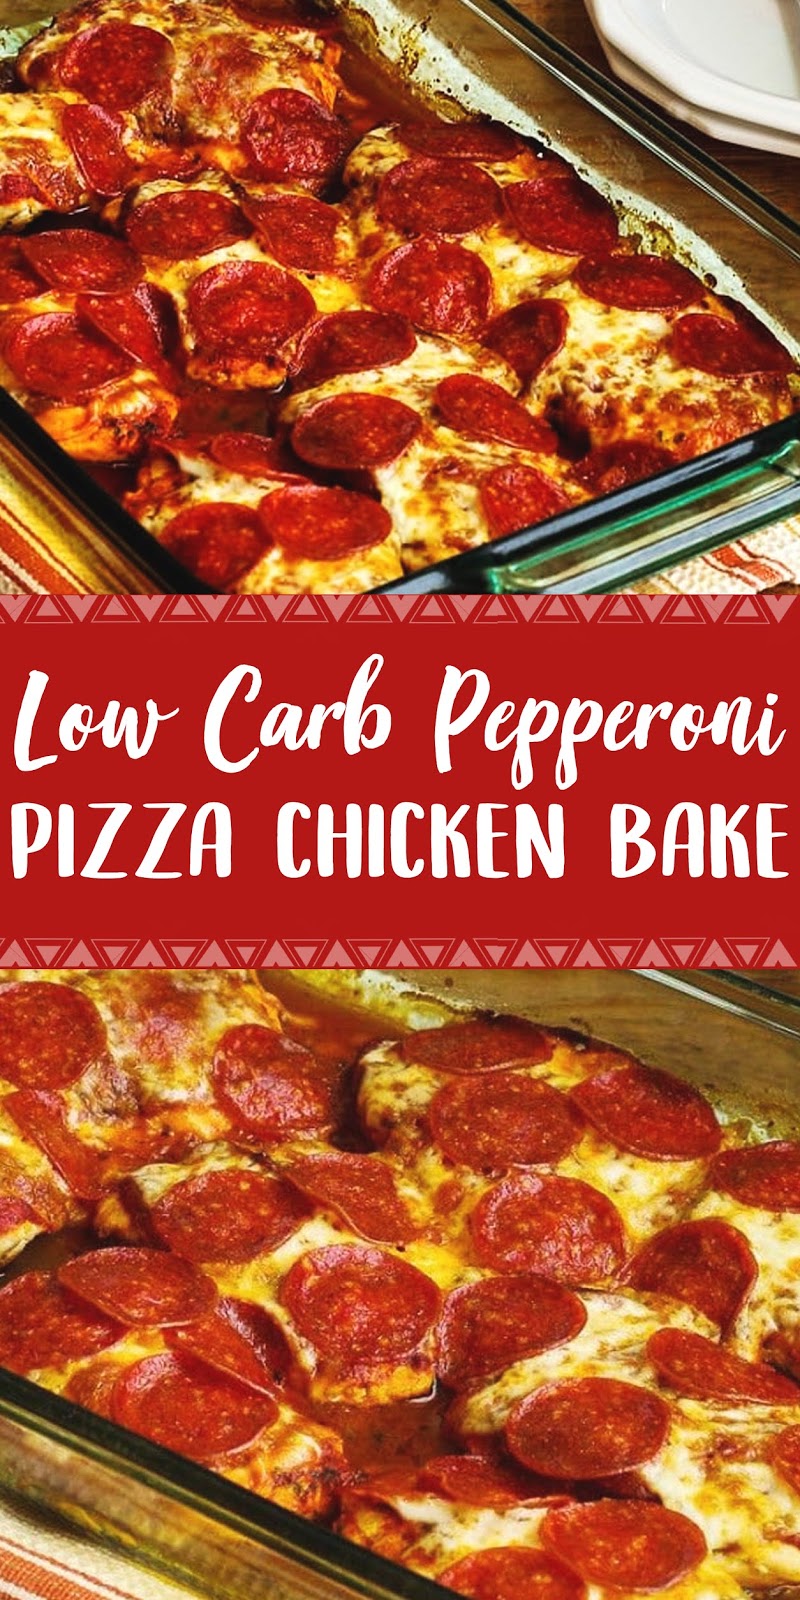 LOW-CARB PEPPERONI PIZZA CHICKEN BAKE - HEALTH HACKS DIY